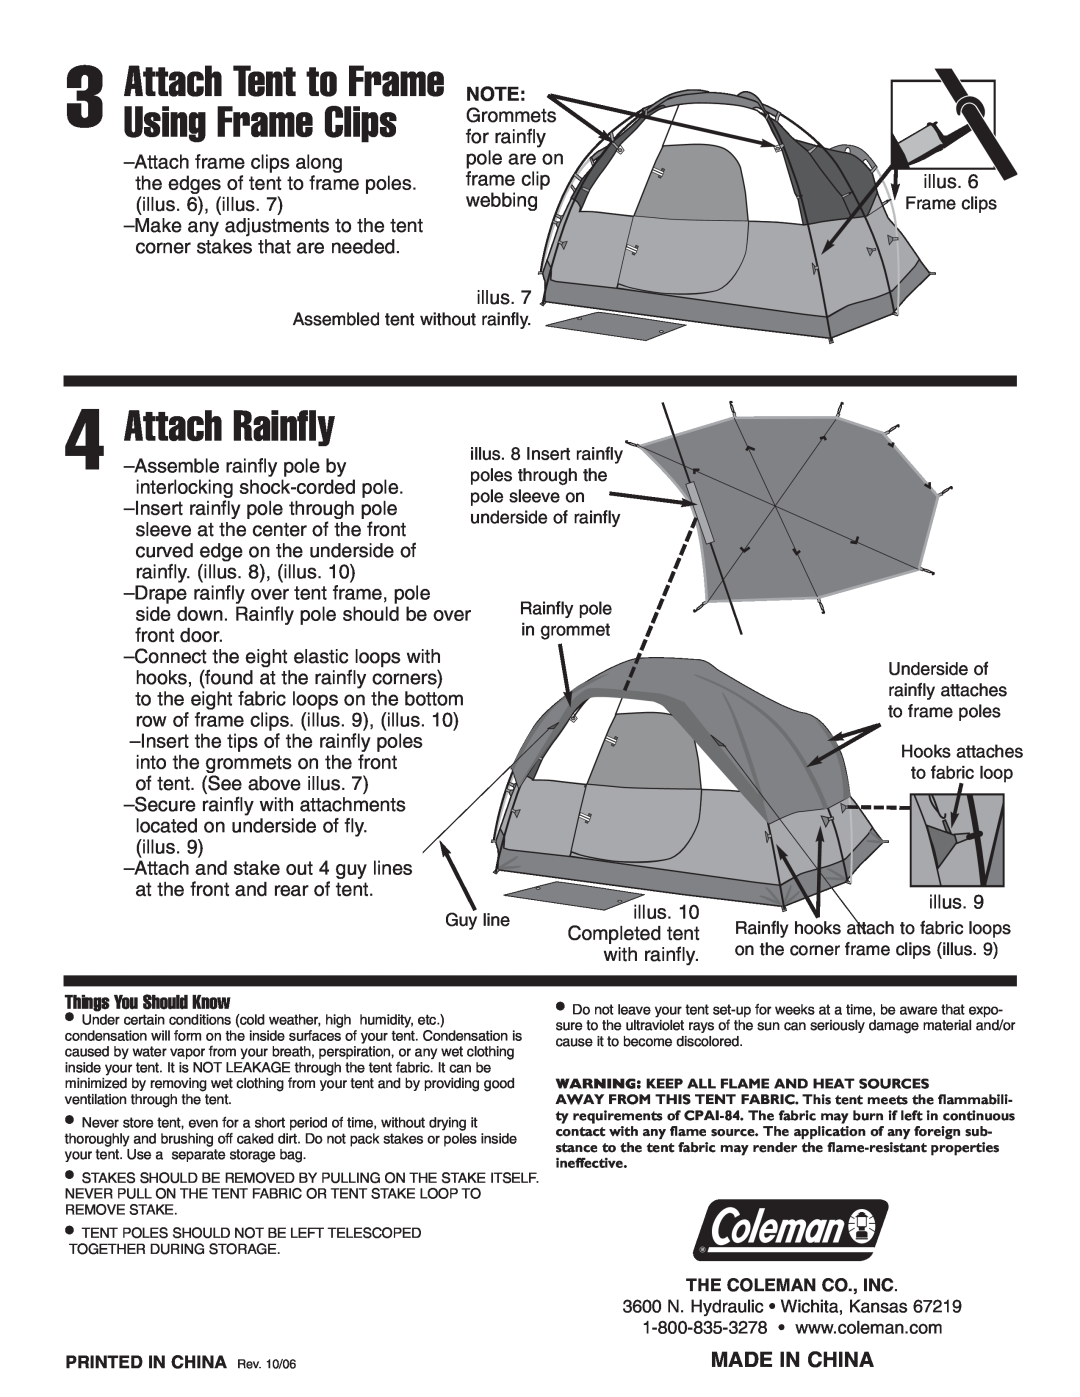 Coleman 9277B151 manual Attach Rainfly, Attach Tent to Frame Using Frame Clips, Made In China 